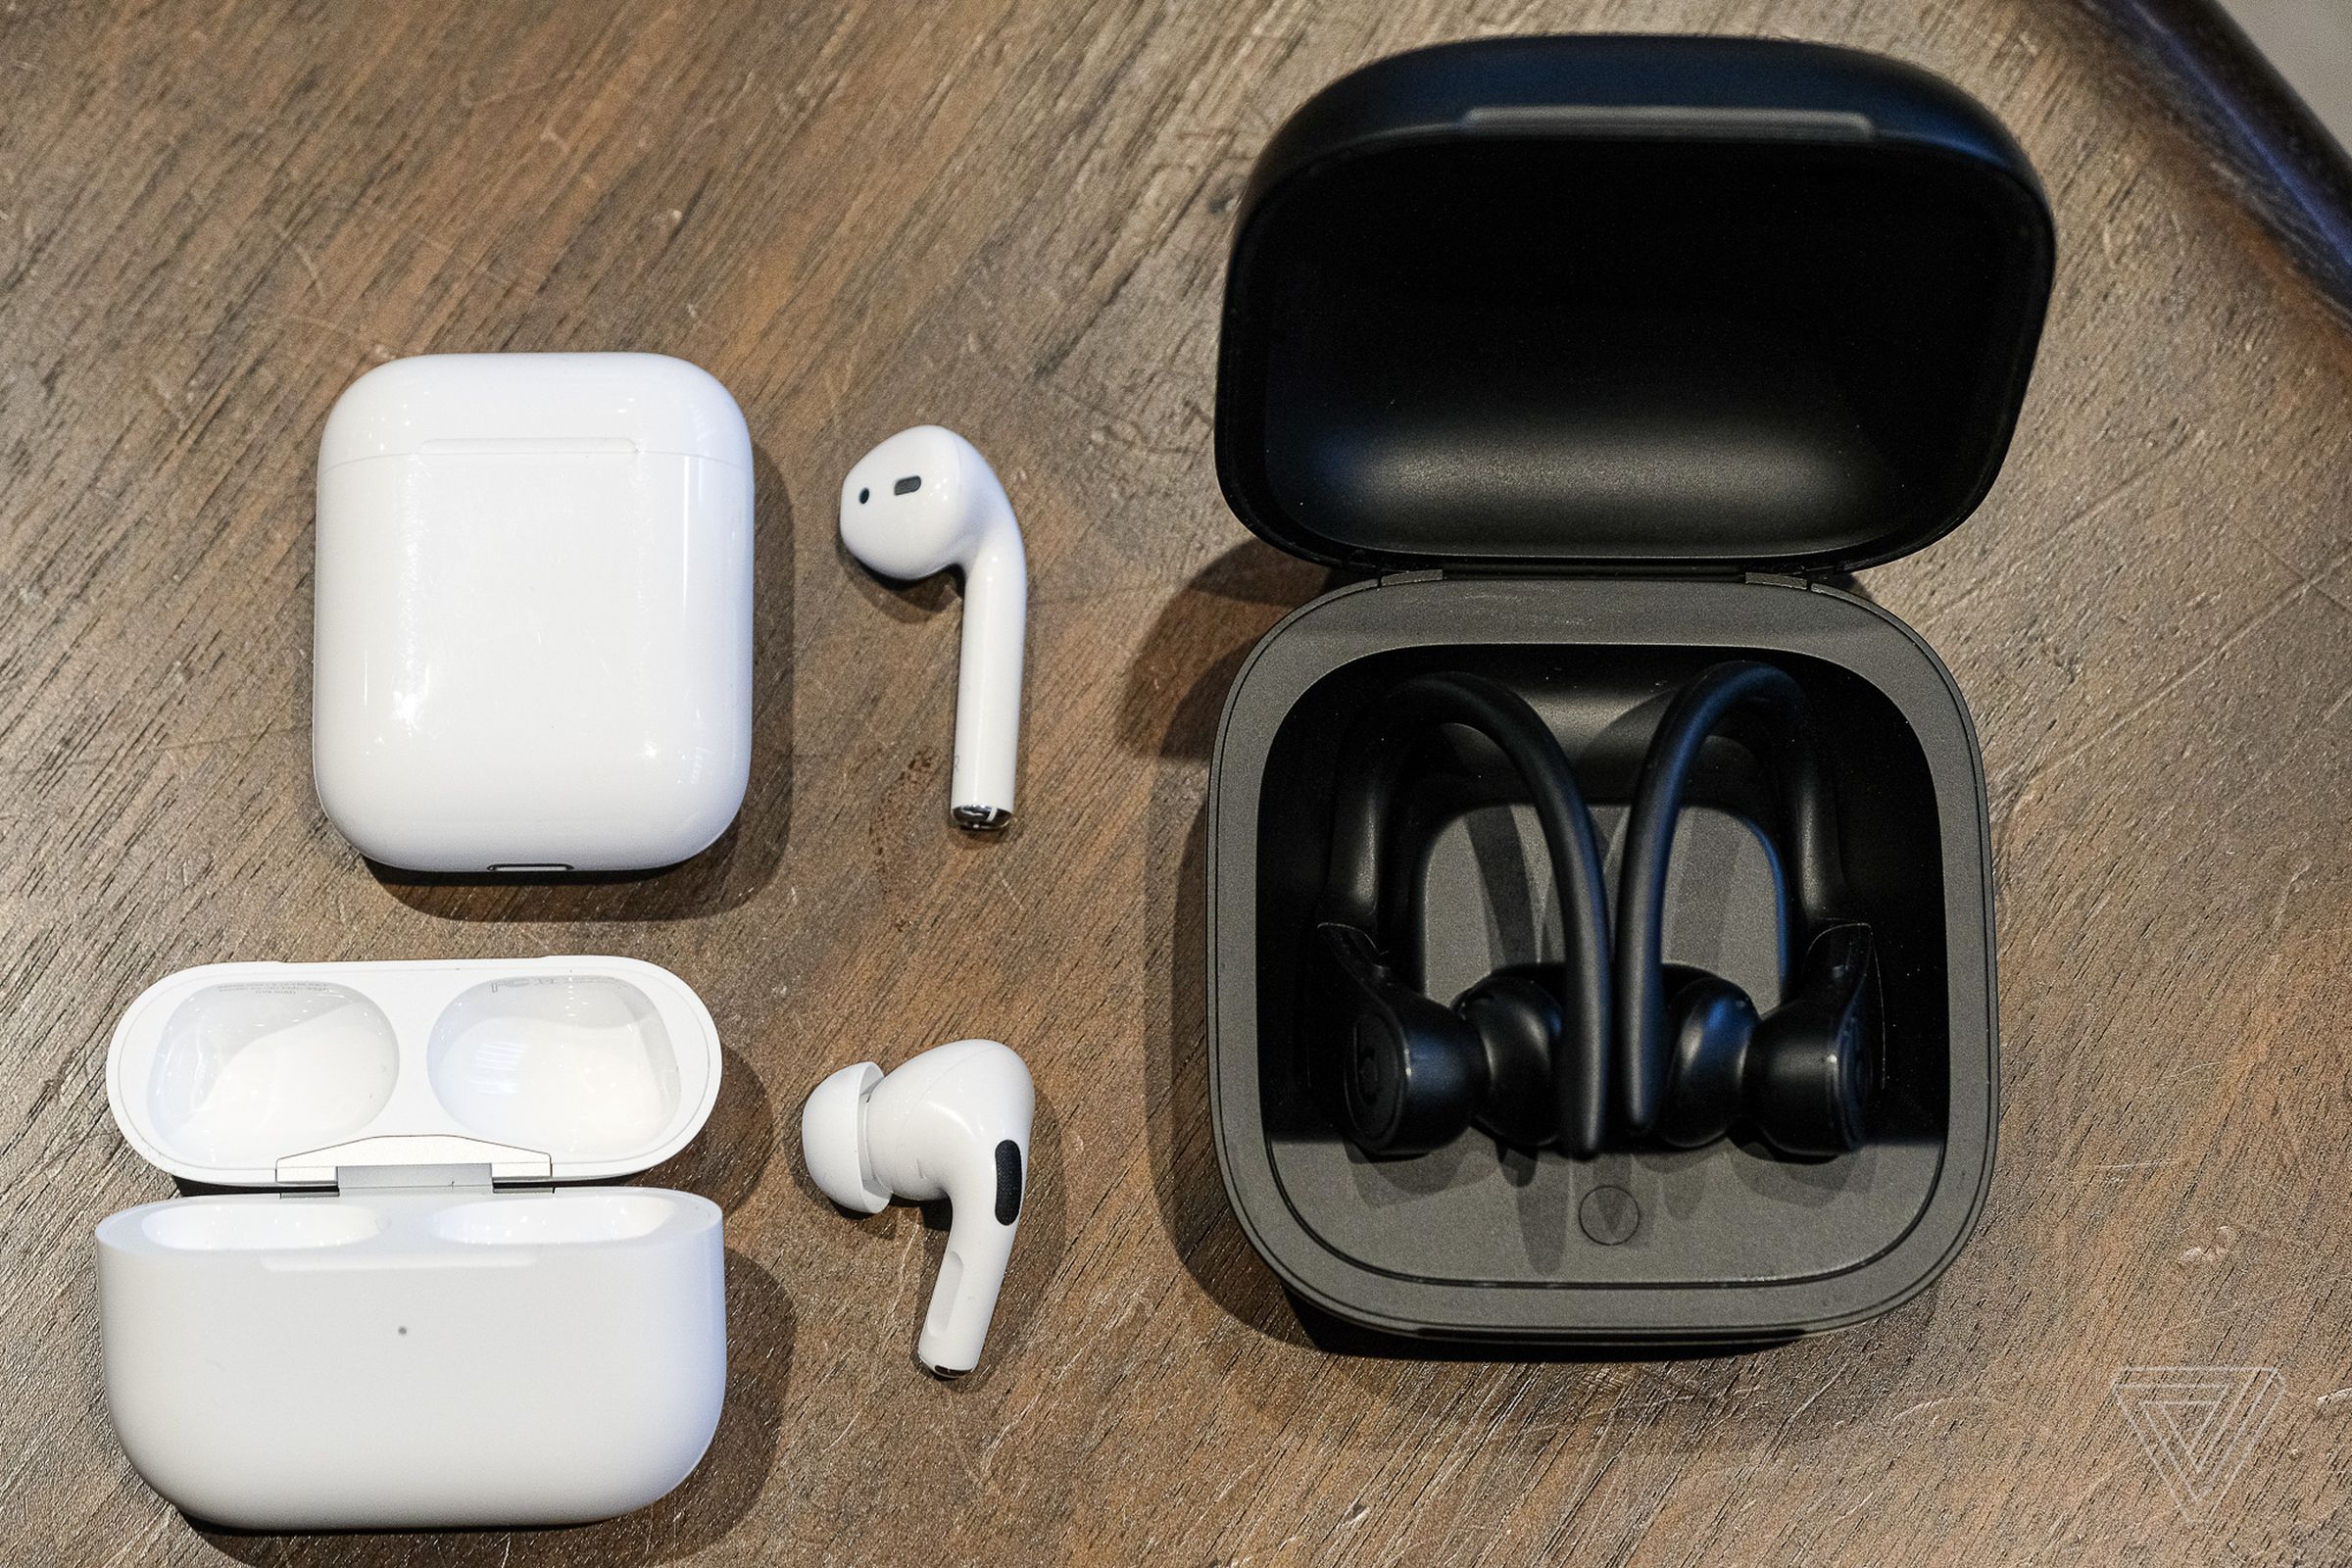 AirPods Pro at bottom left, with the previous AirPods above them and Powerbeats Pro to the right.